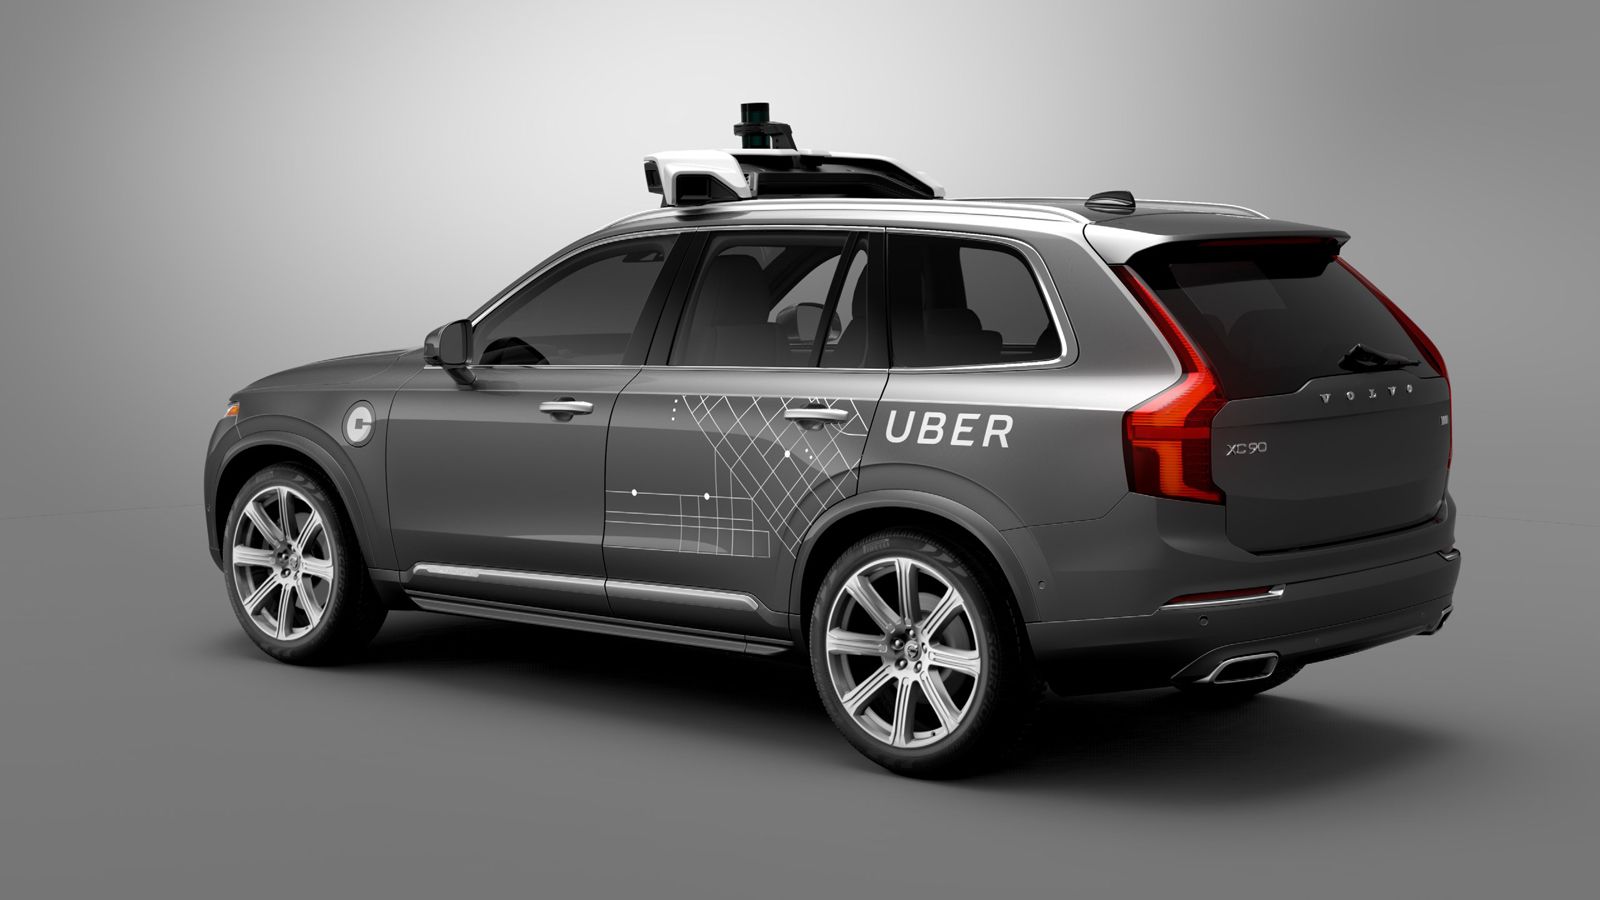 uber and volvo jointly working on autonomous taxis as test fleet arrives in pittsburgh image 3